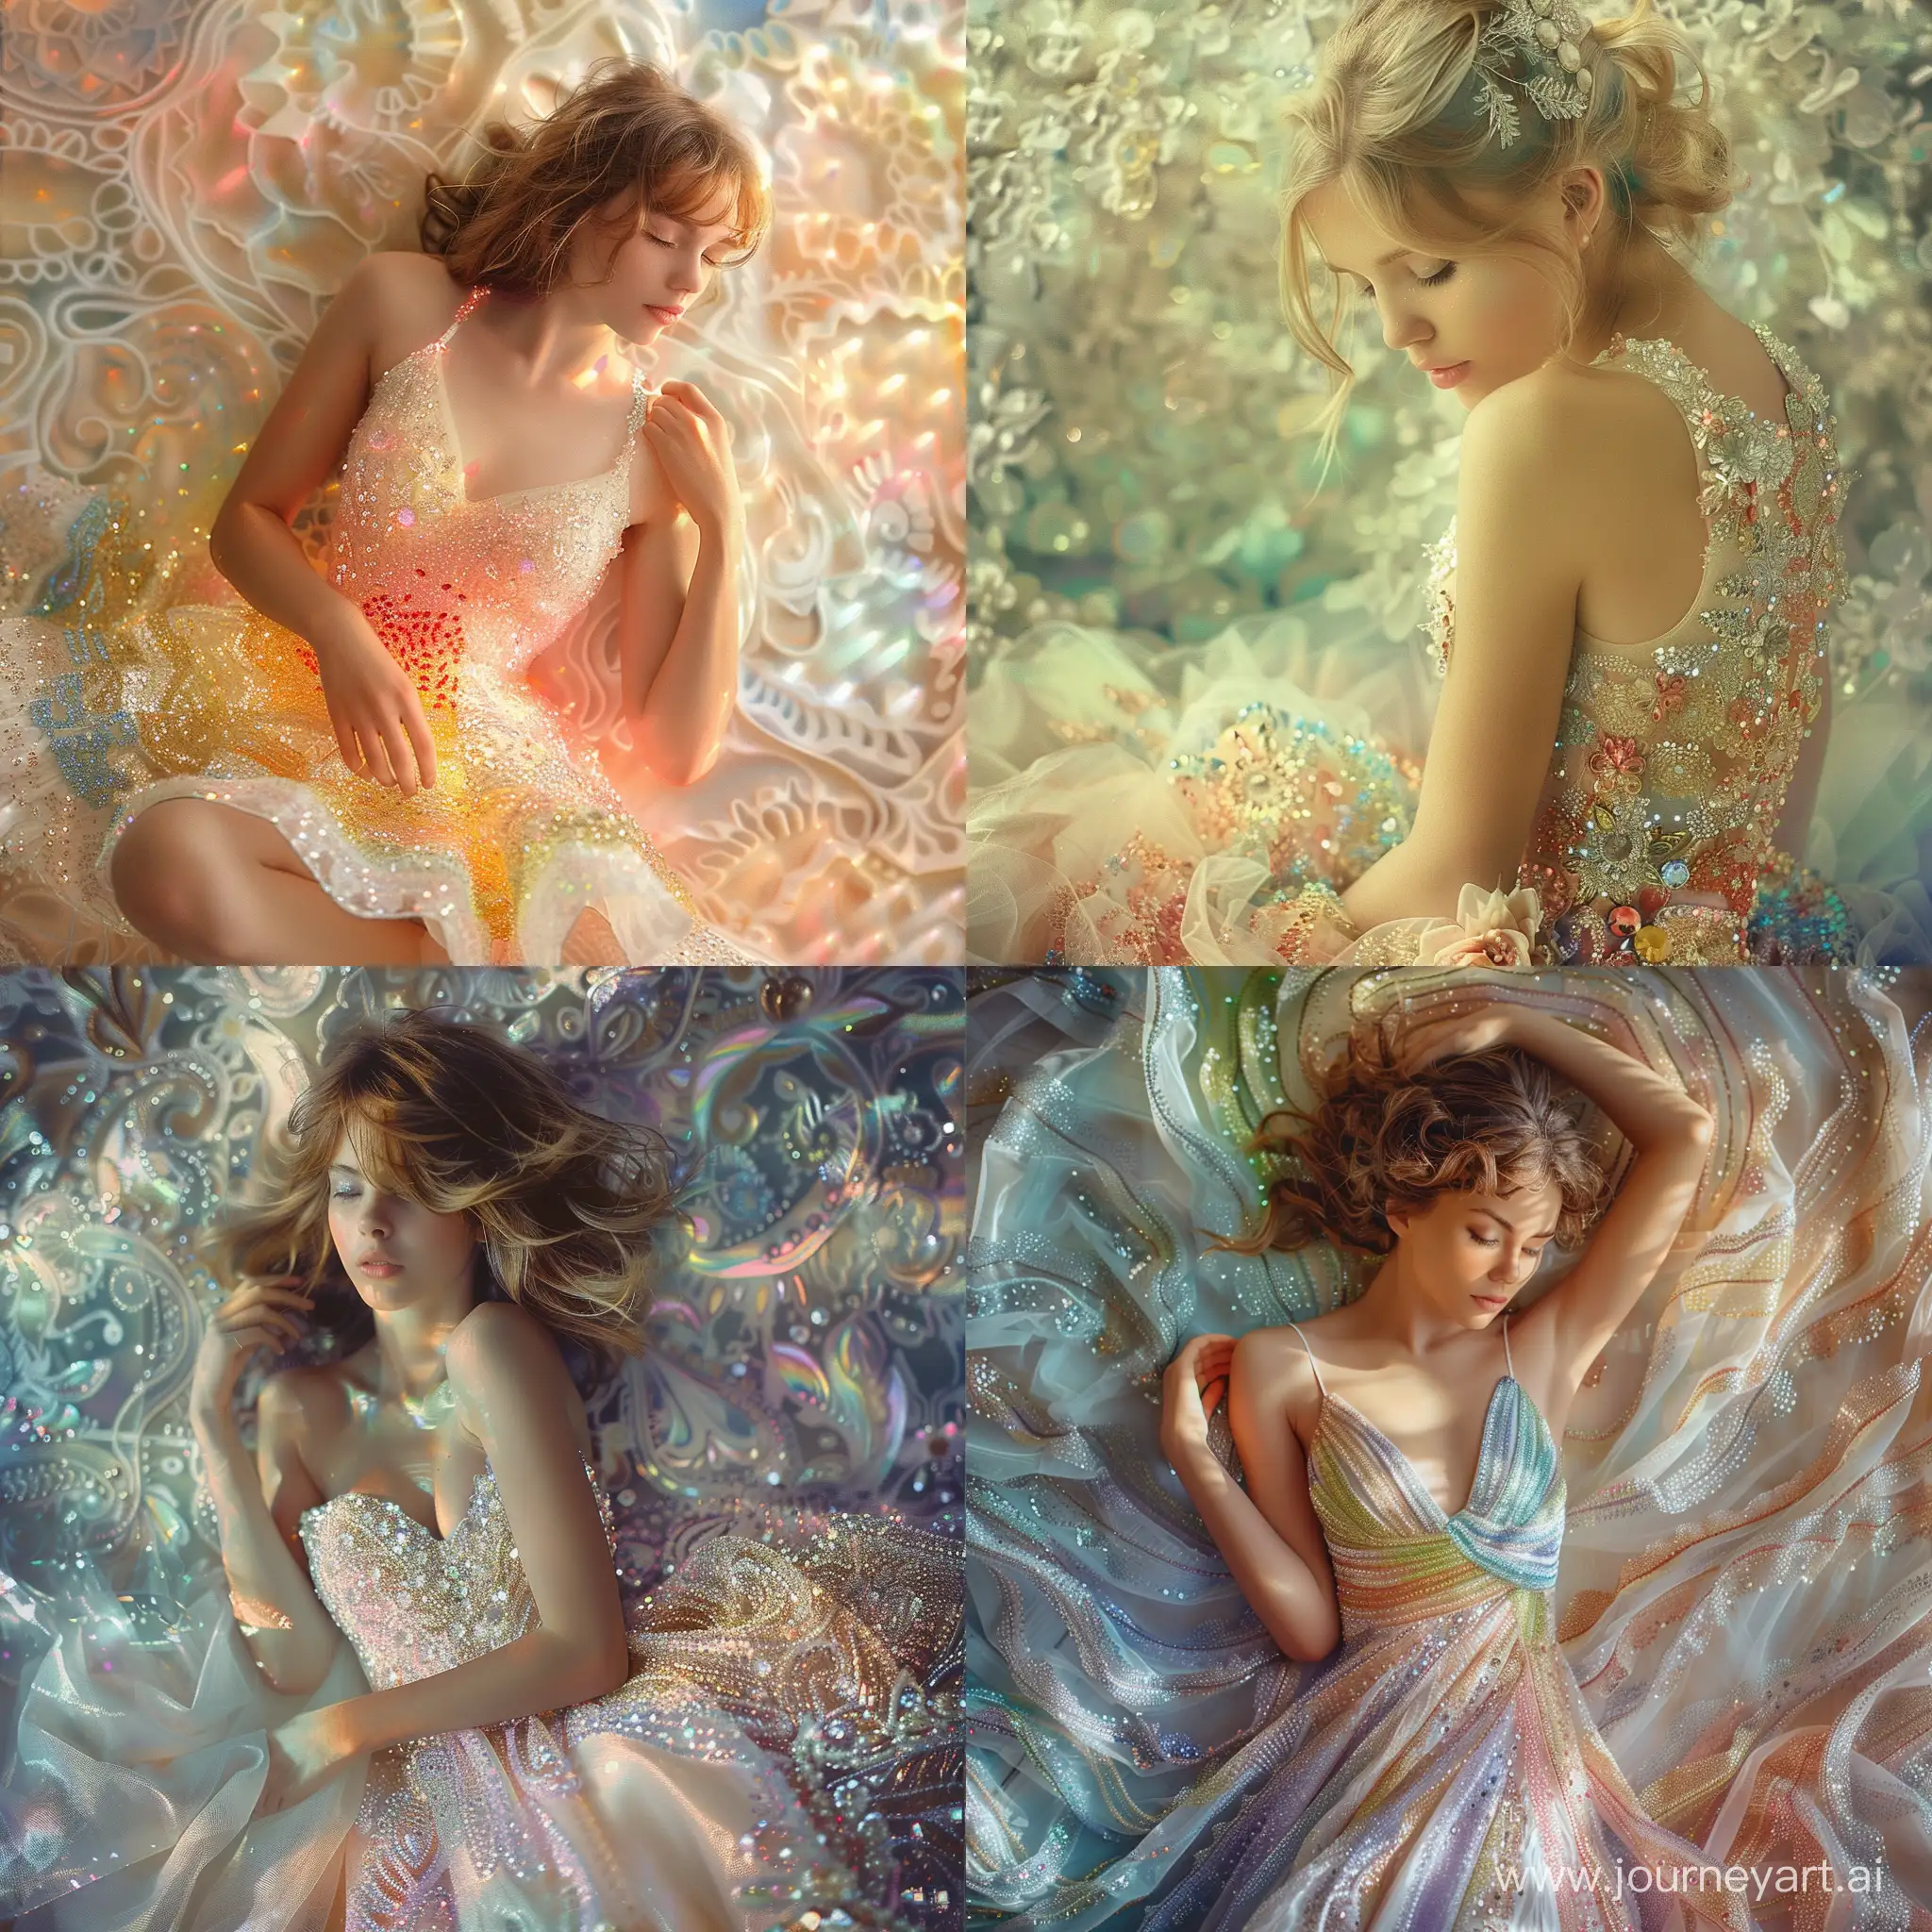 Artistic photography, surreal. A beautiful girl in a (summer dress) (made entirely of colored Swarovski crystals)... Unusual, unique. In the style of surreal images by Pauline Guillard, soft and sweet, intricate background. V6